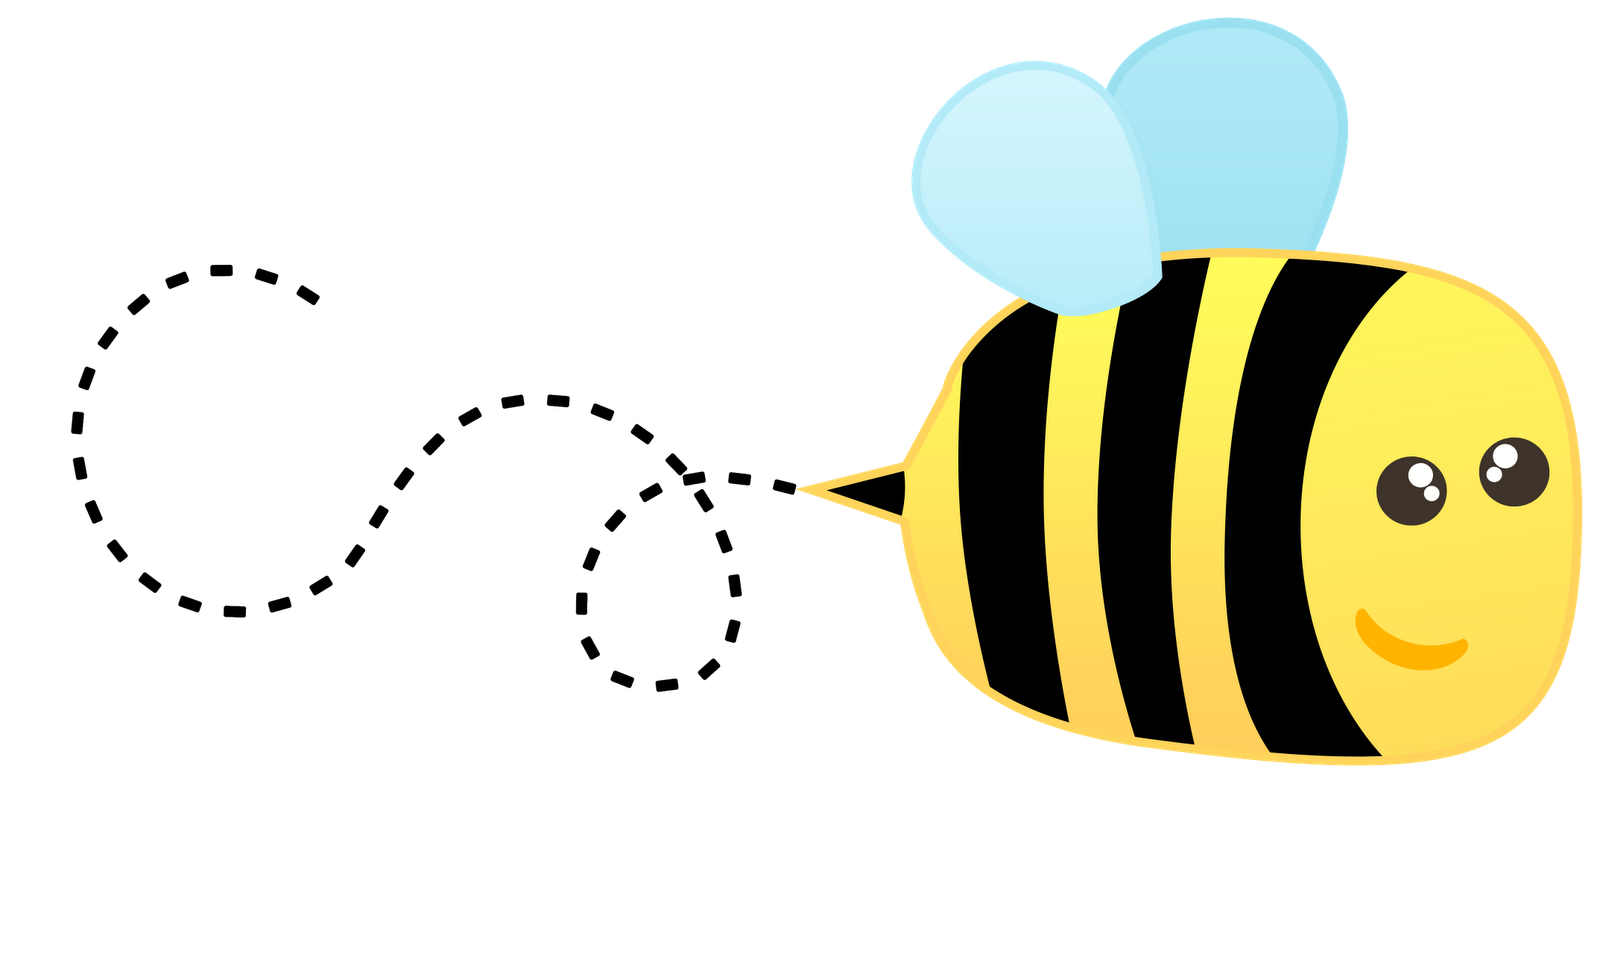 cute-bumble-bee-clip-art-free-cliparts-co